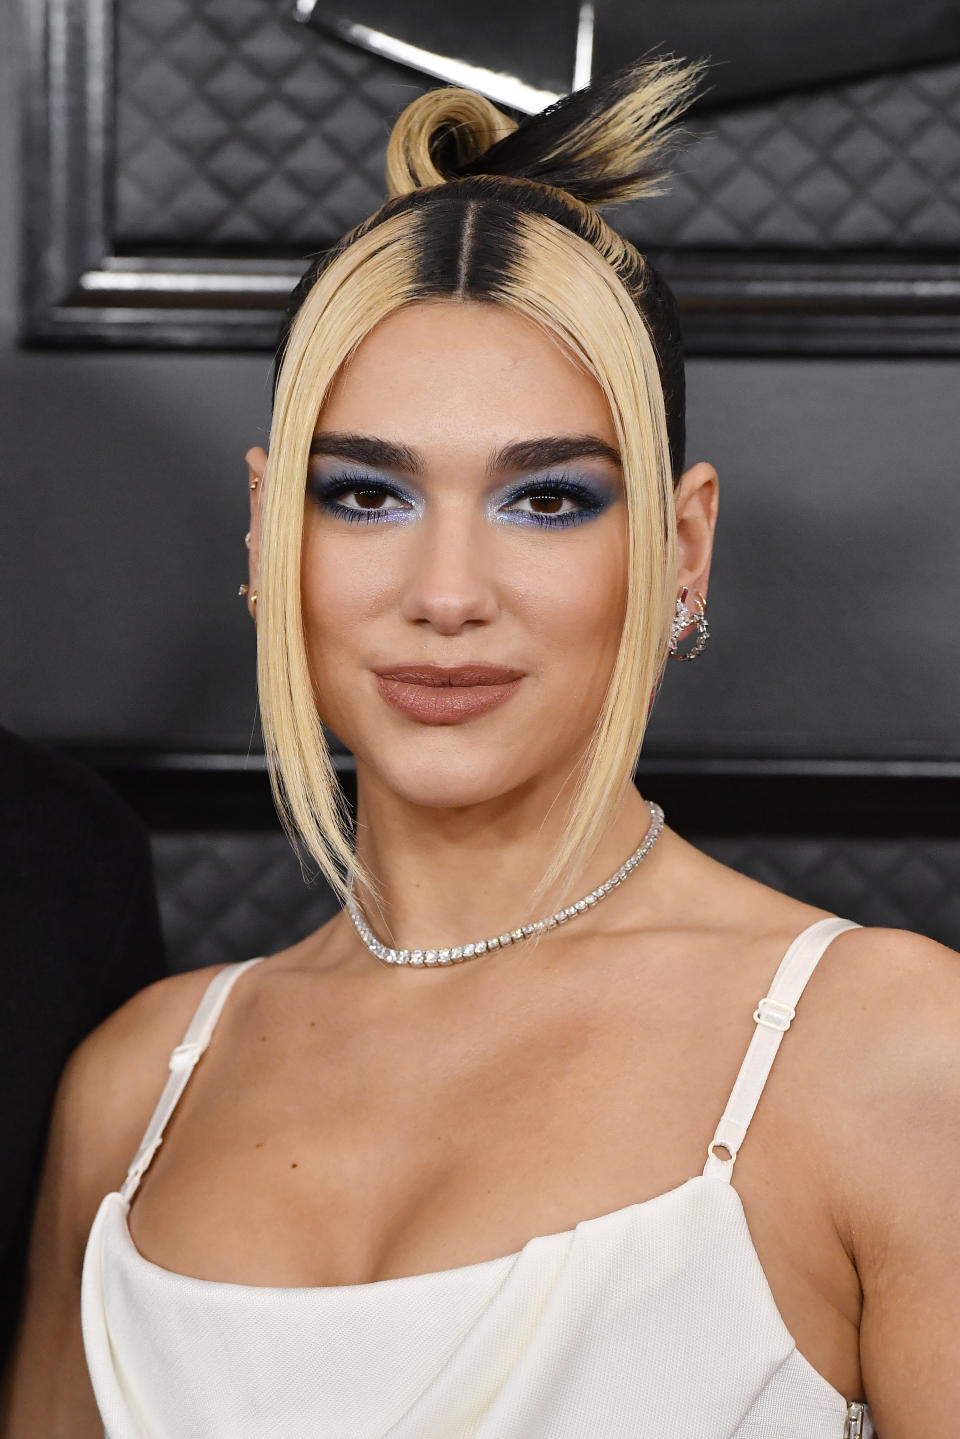 LOS ANGELES, CALIFORNIA - JANUARY 26: Dua Lipa attends the 62nd Annual GRAMMY Awards at STAPLES Center on January 26, 2020 in Los Angeles, California. (Photo by Frazer Harrison/Getty Images for The Recording Academy)